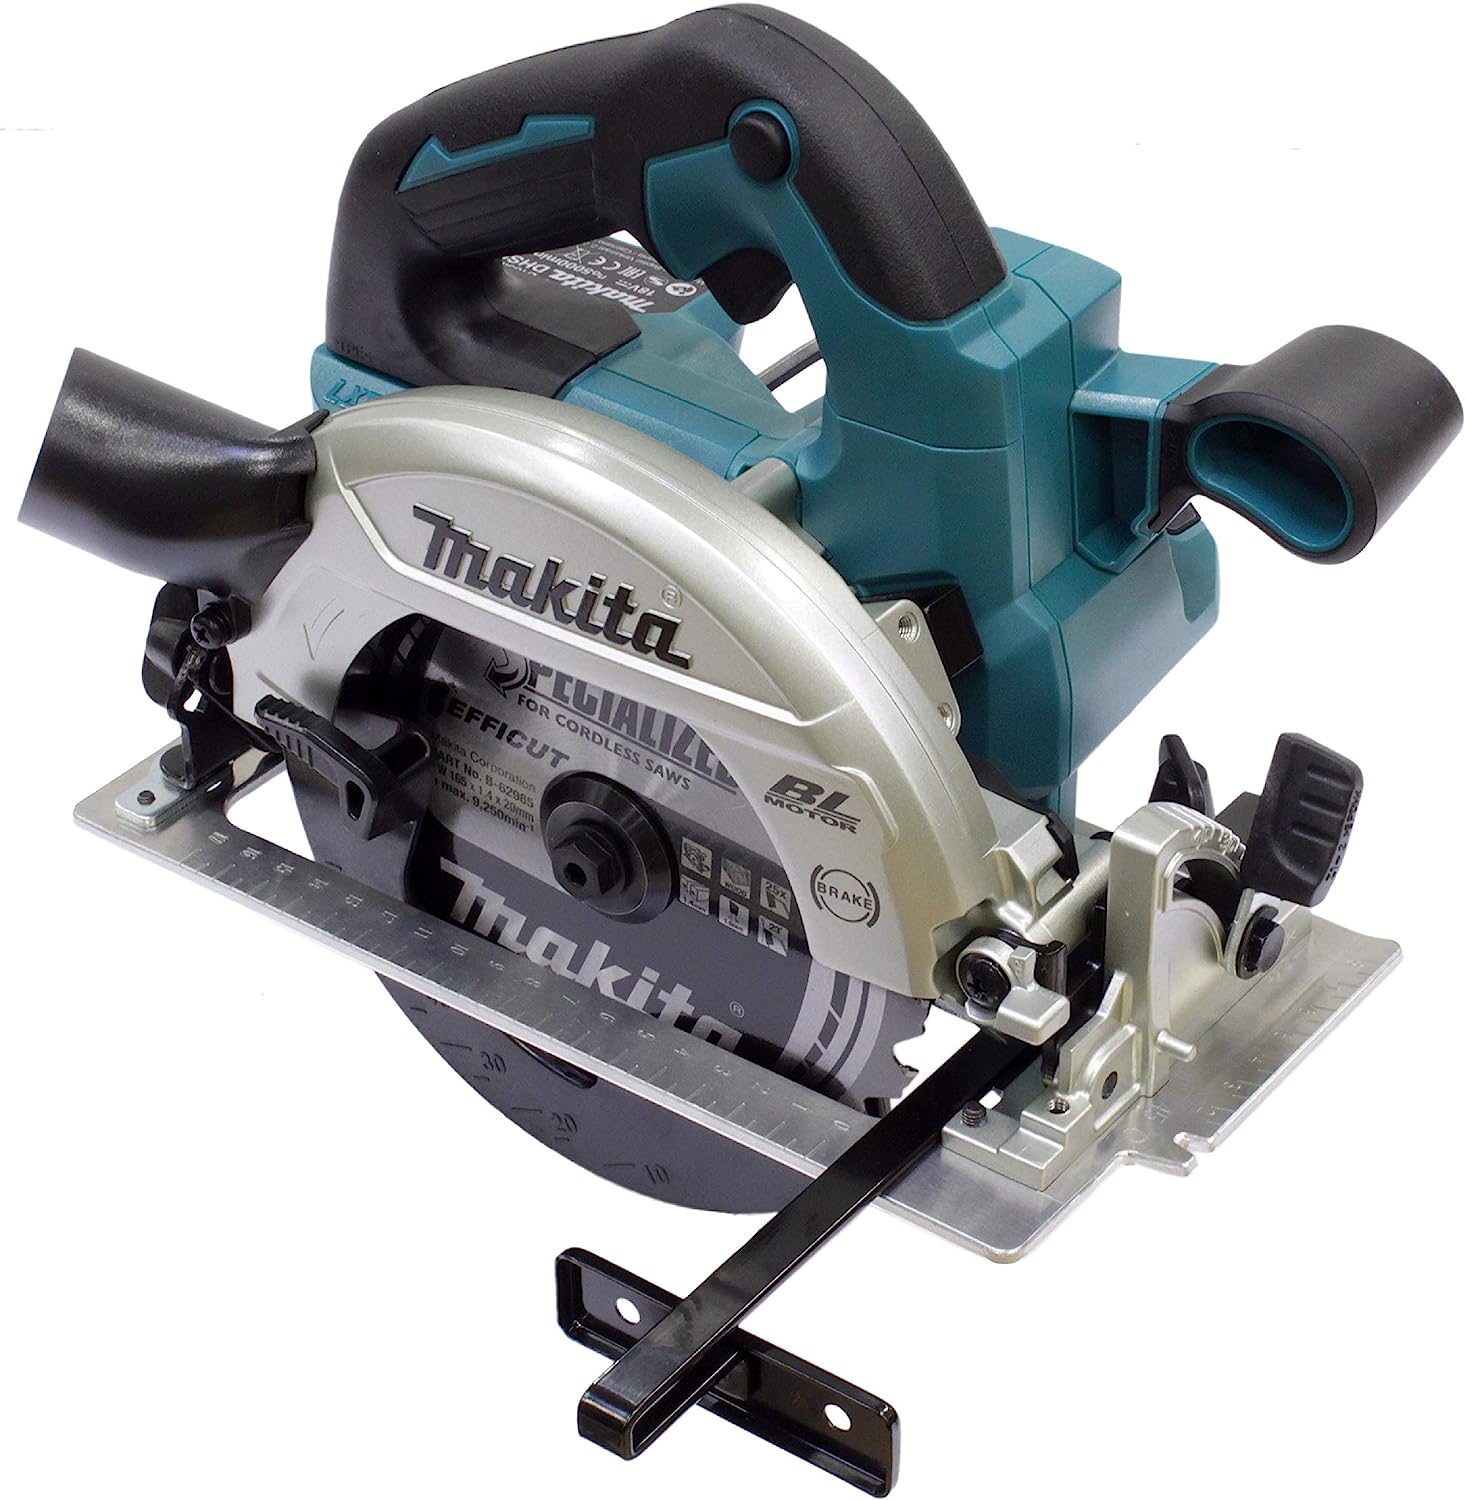 Makita DHS661ZU 18V Li-Ion LXT Brushless 165mm Circular Saw - Compact and powerful saw with brushless motor, ideal for various trades. Features Auto-start Wireless System (AWS) for dust extraction, electric brake, LED job light, and soft start. Offers bevel cutting capacity, lightweight design, rear-facing exhaust port, and lock-off button. Blower function for better cutting view, Automatic Torque Drive Technology (ADT), improved blade tip visibility, and easy-to-read scale markings. Technical specification